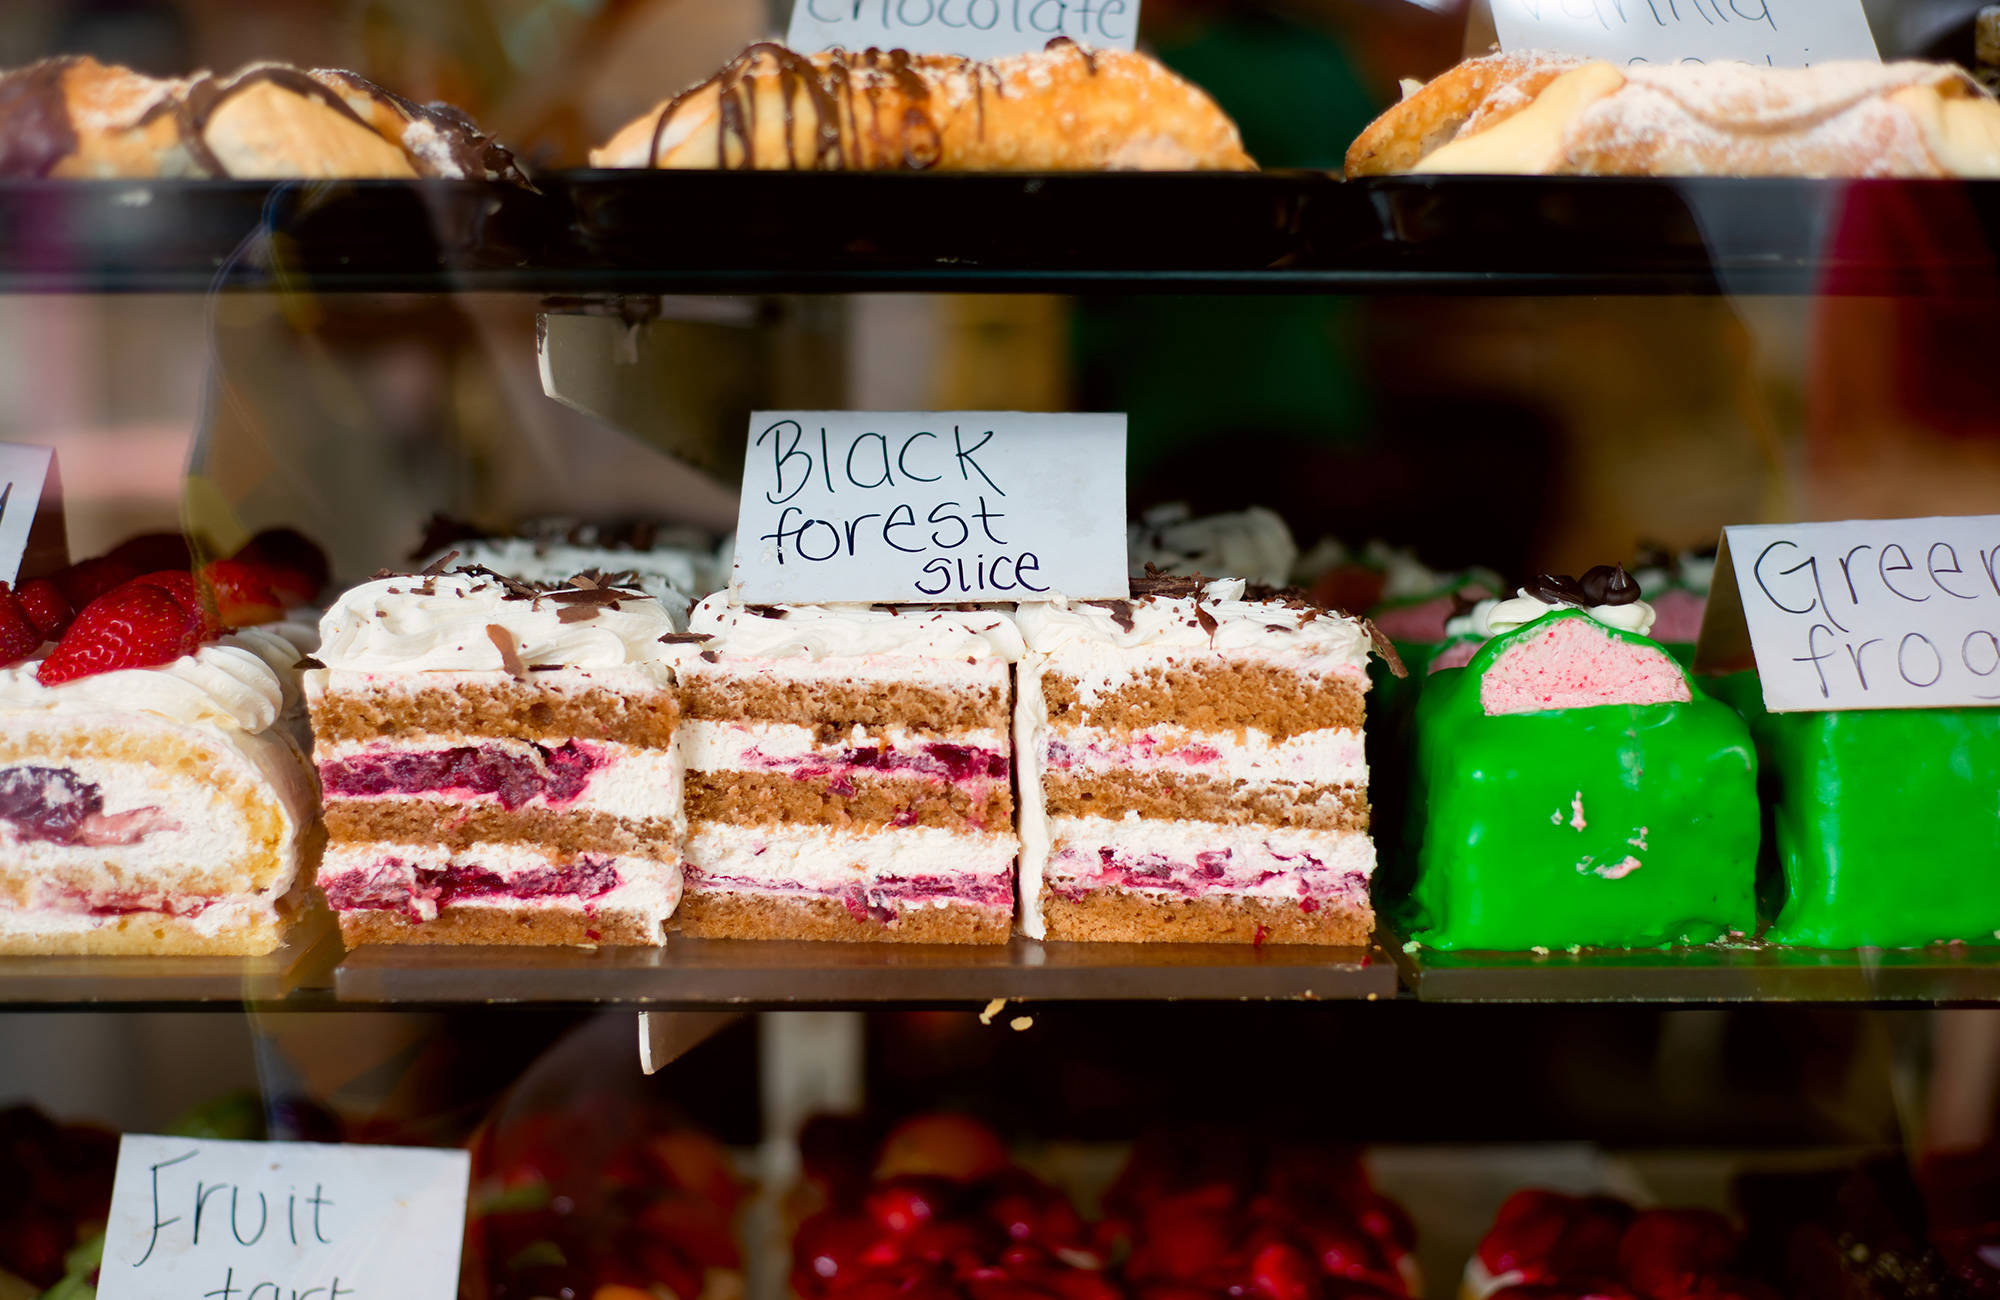 try the cakes in melbourne while studying at rmit university